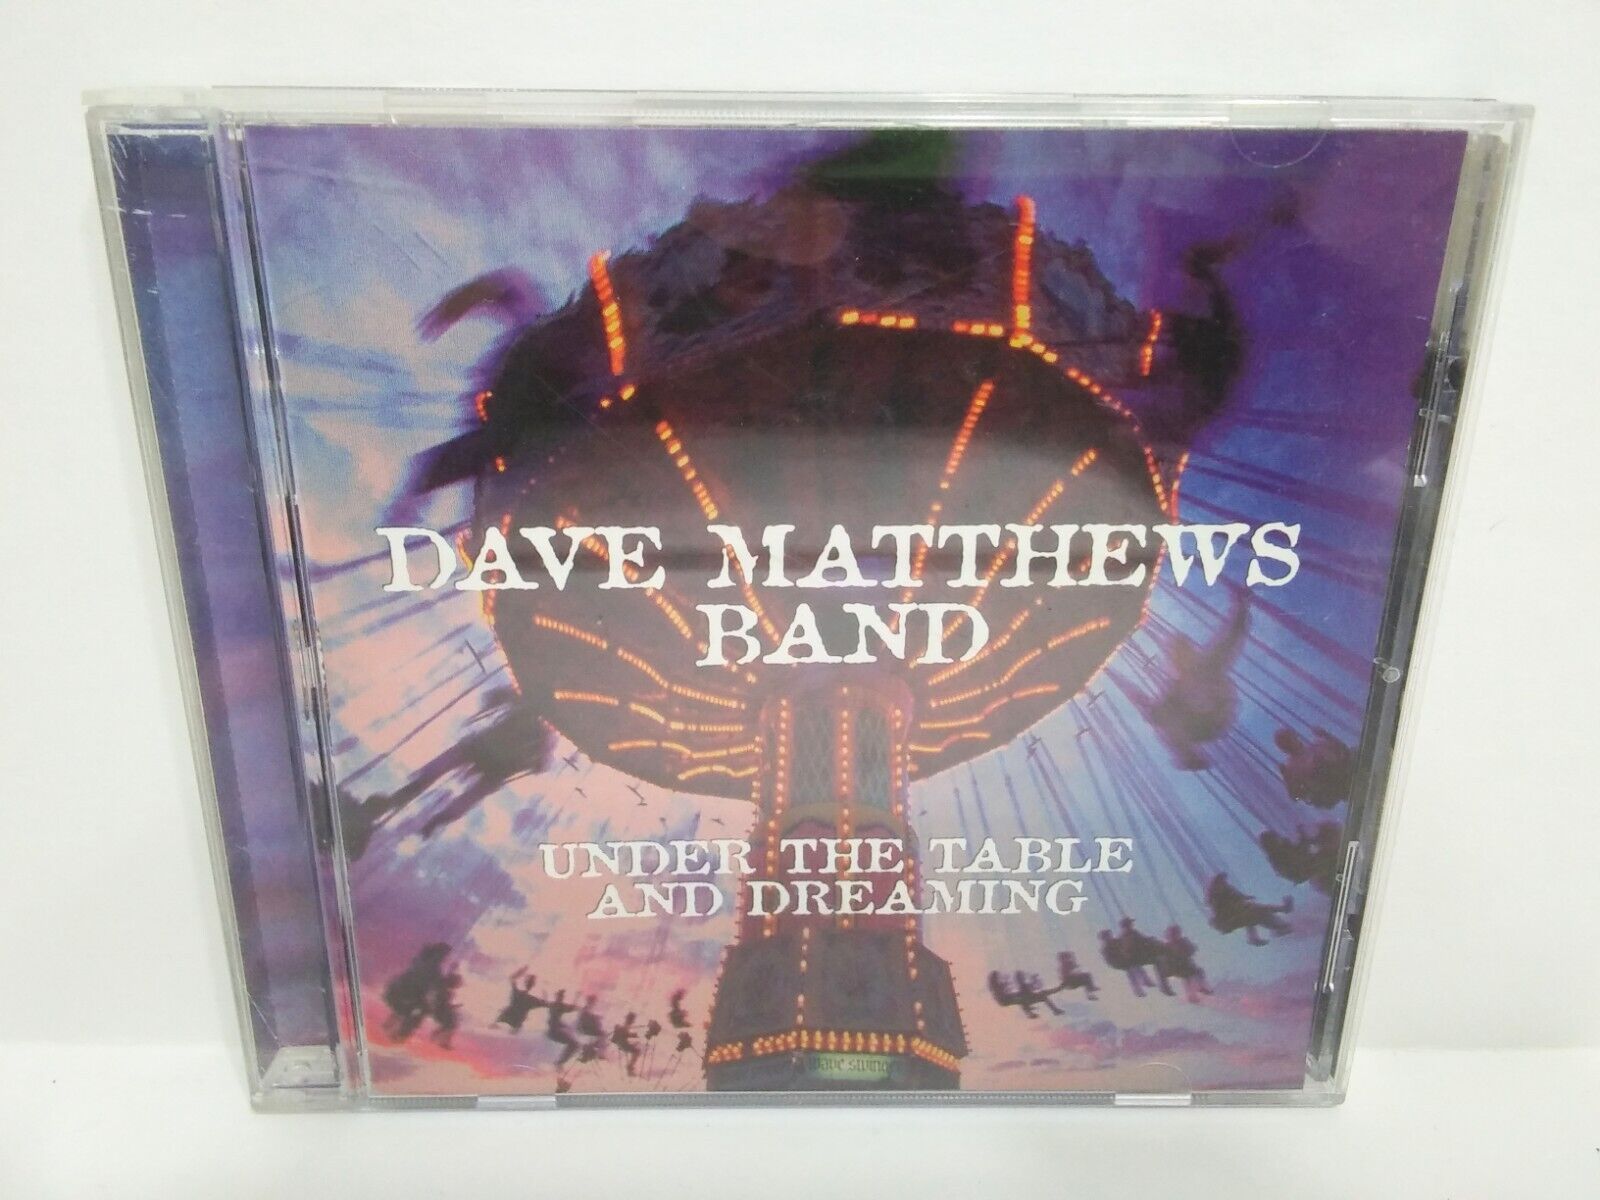 Dave Mathews Band Under The Table and Dreaming CD